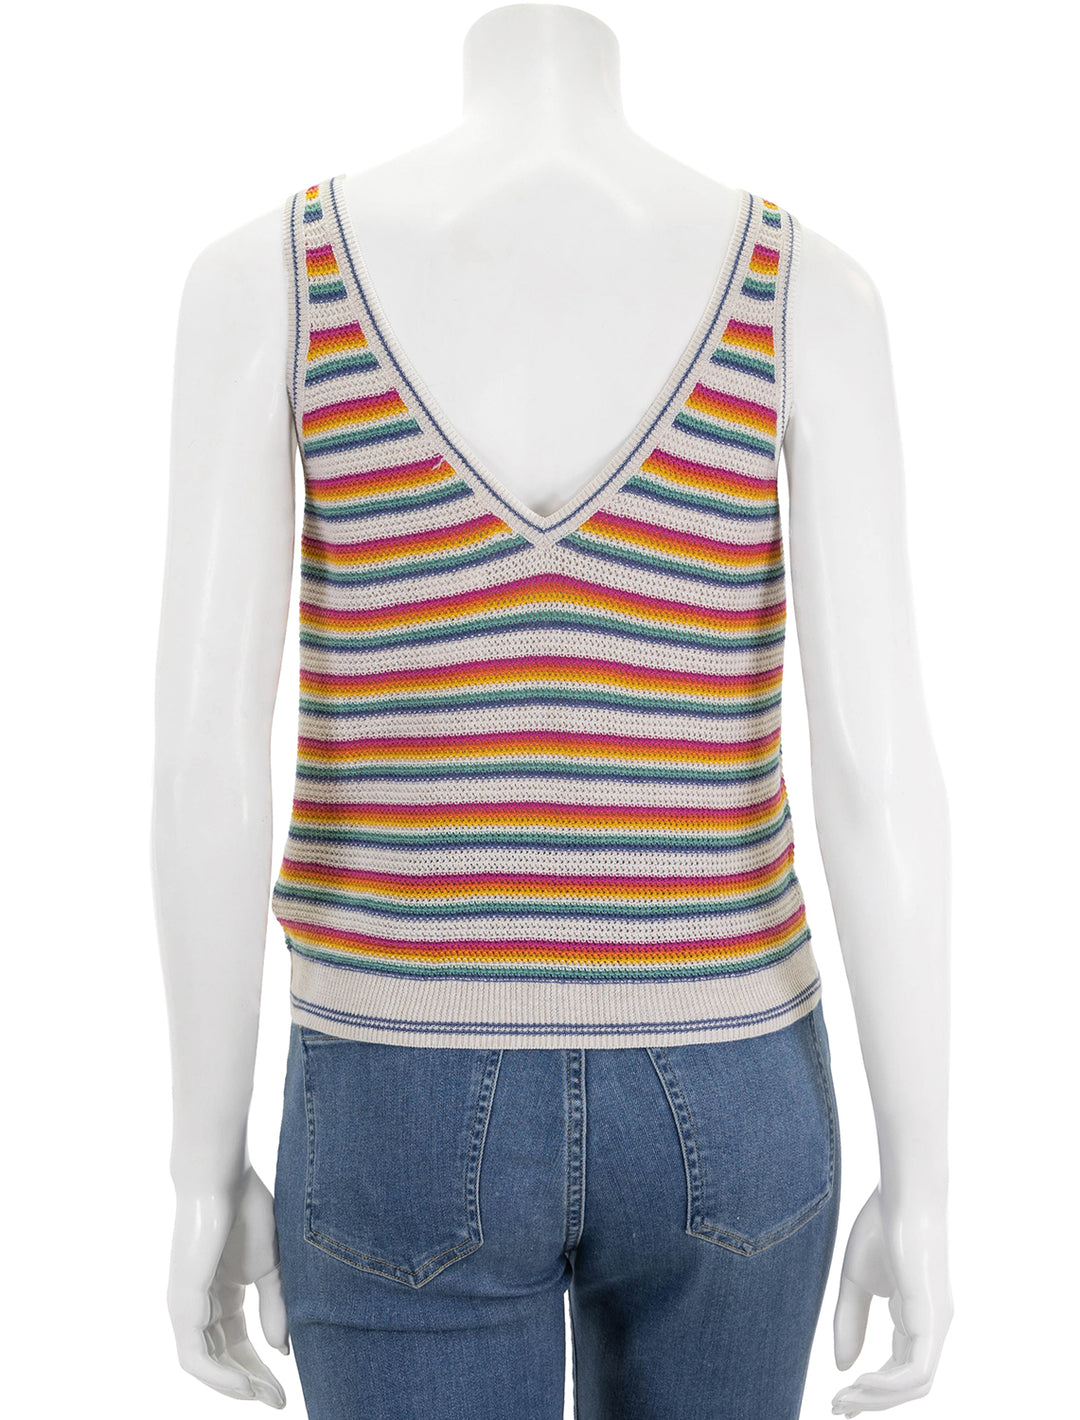 Back view of Marine Layer's finley sweater tank in bright stripe.